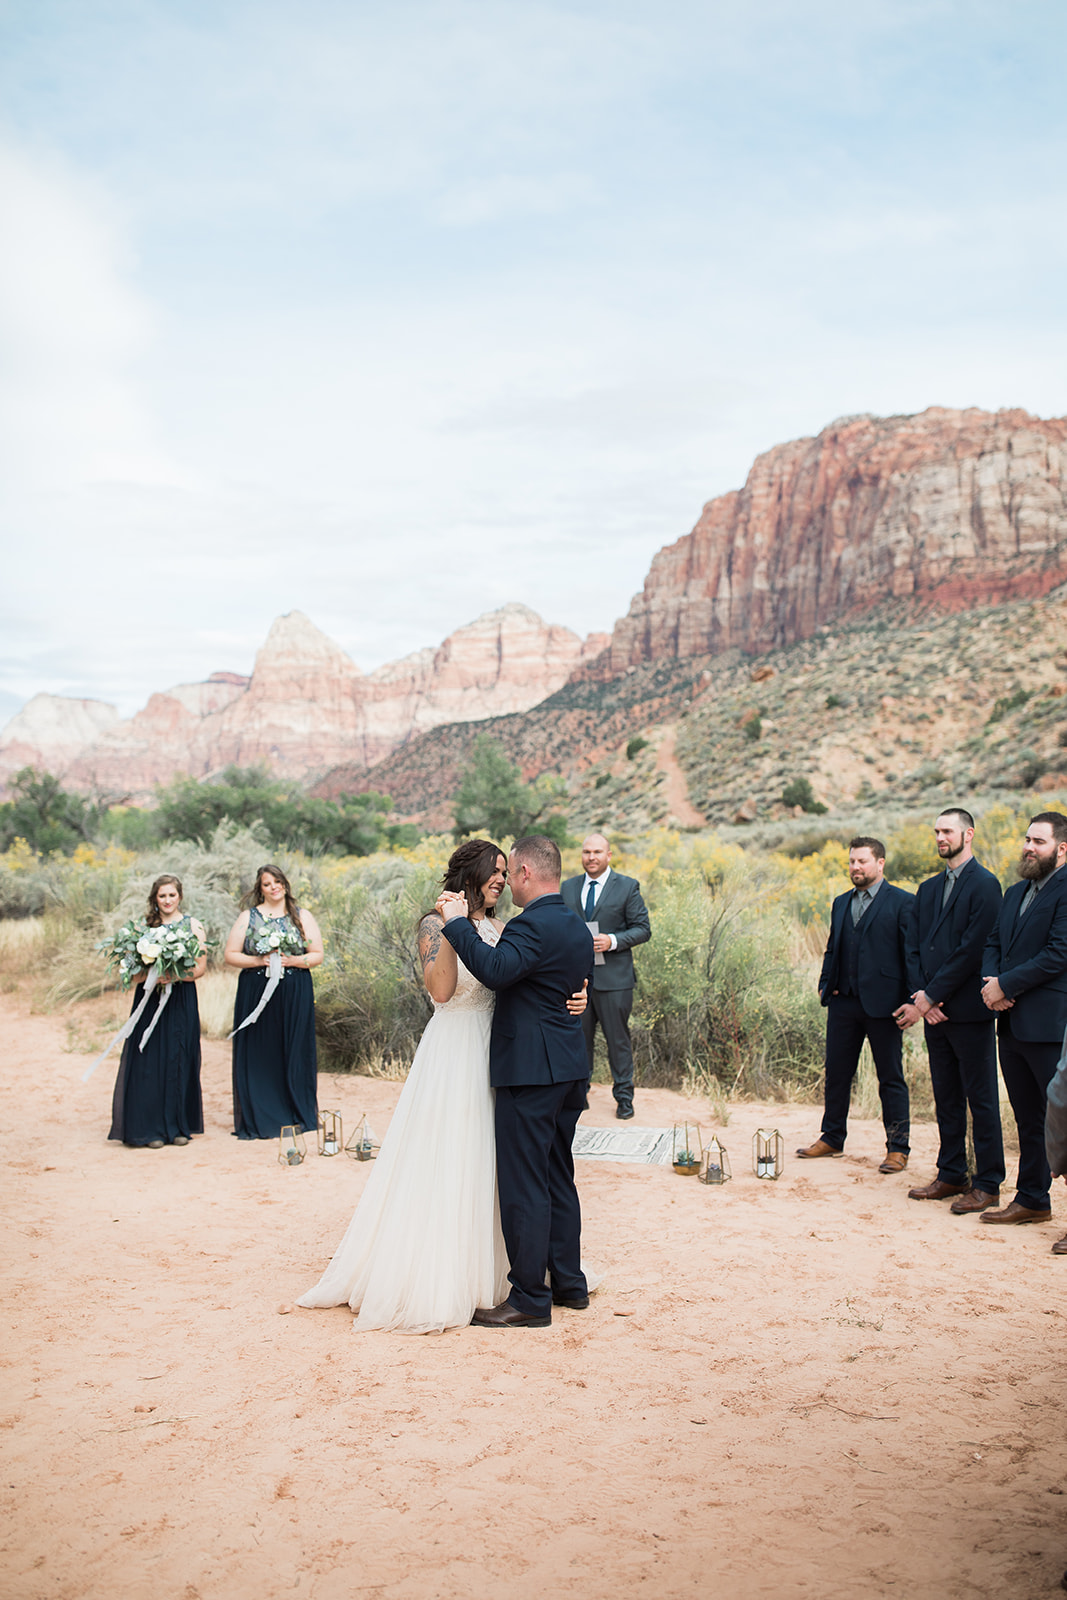 first kiss in front of dramatic Zion mountains